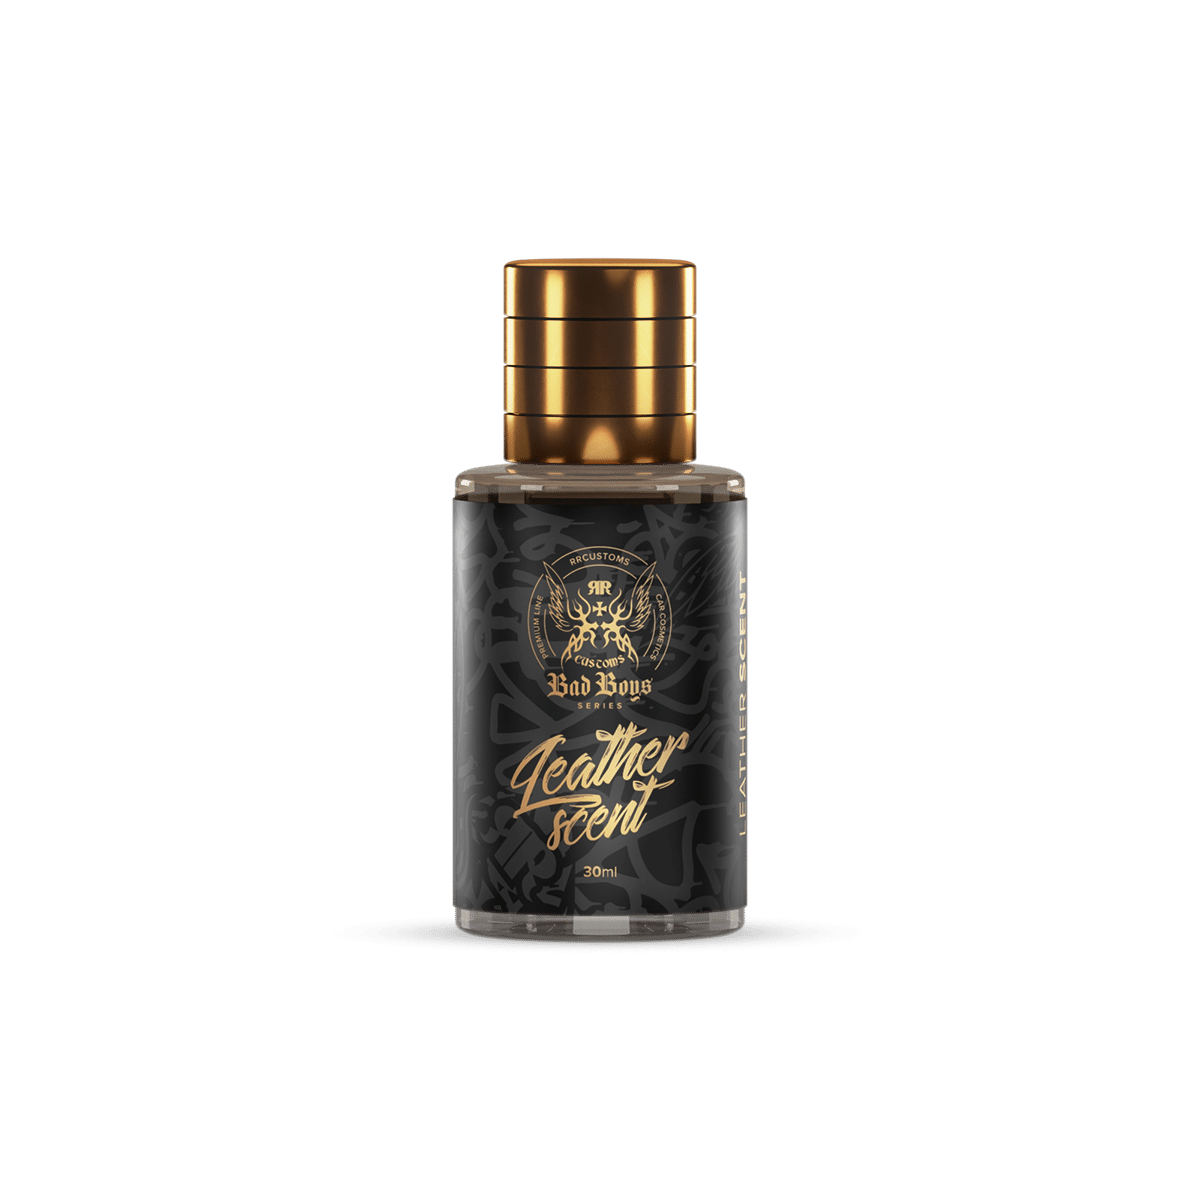 Bad Boys Leather Scent 30ml